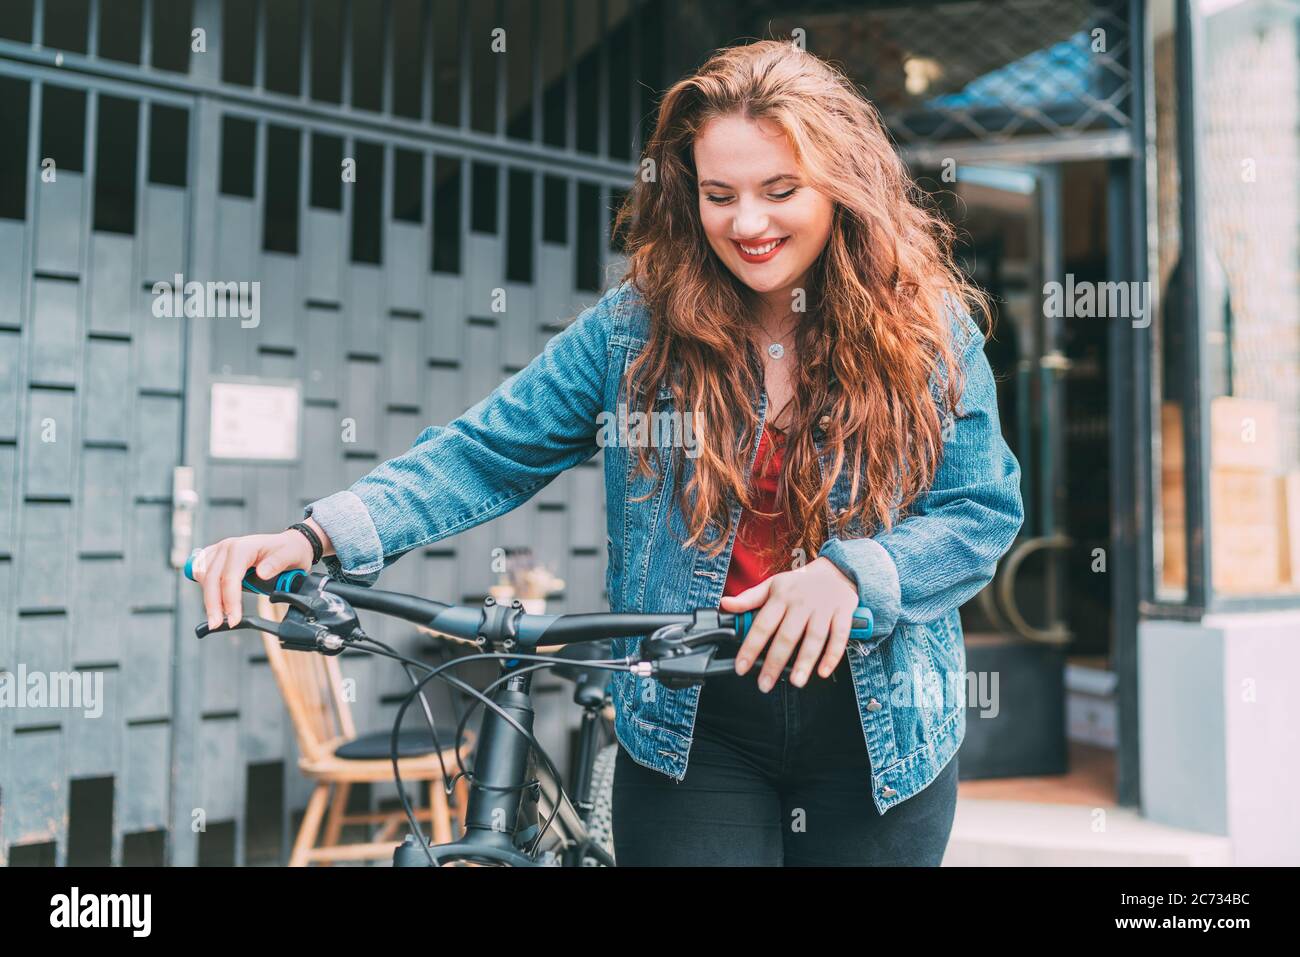 Red curled long hair caucasian teen girl on the city street walking with bicycle fashion portrait. Natural people beauty urban life concept image. Stock Photo